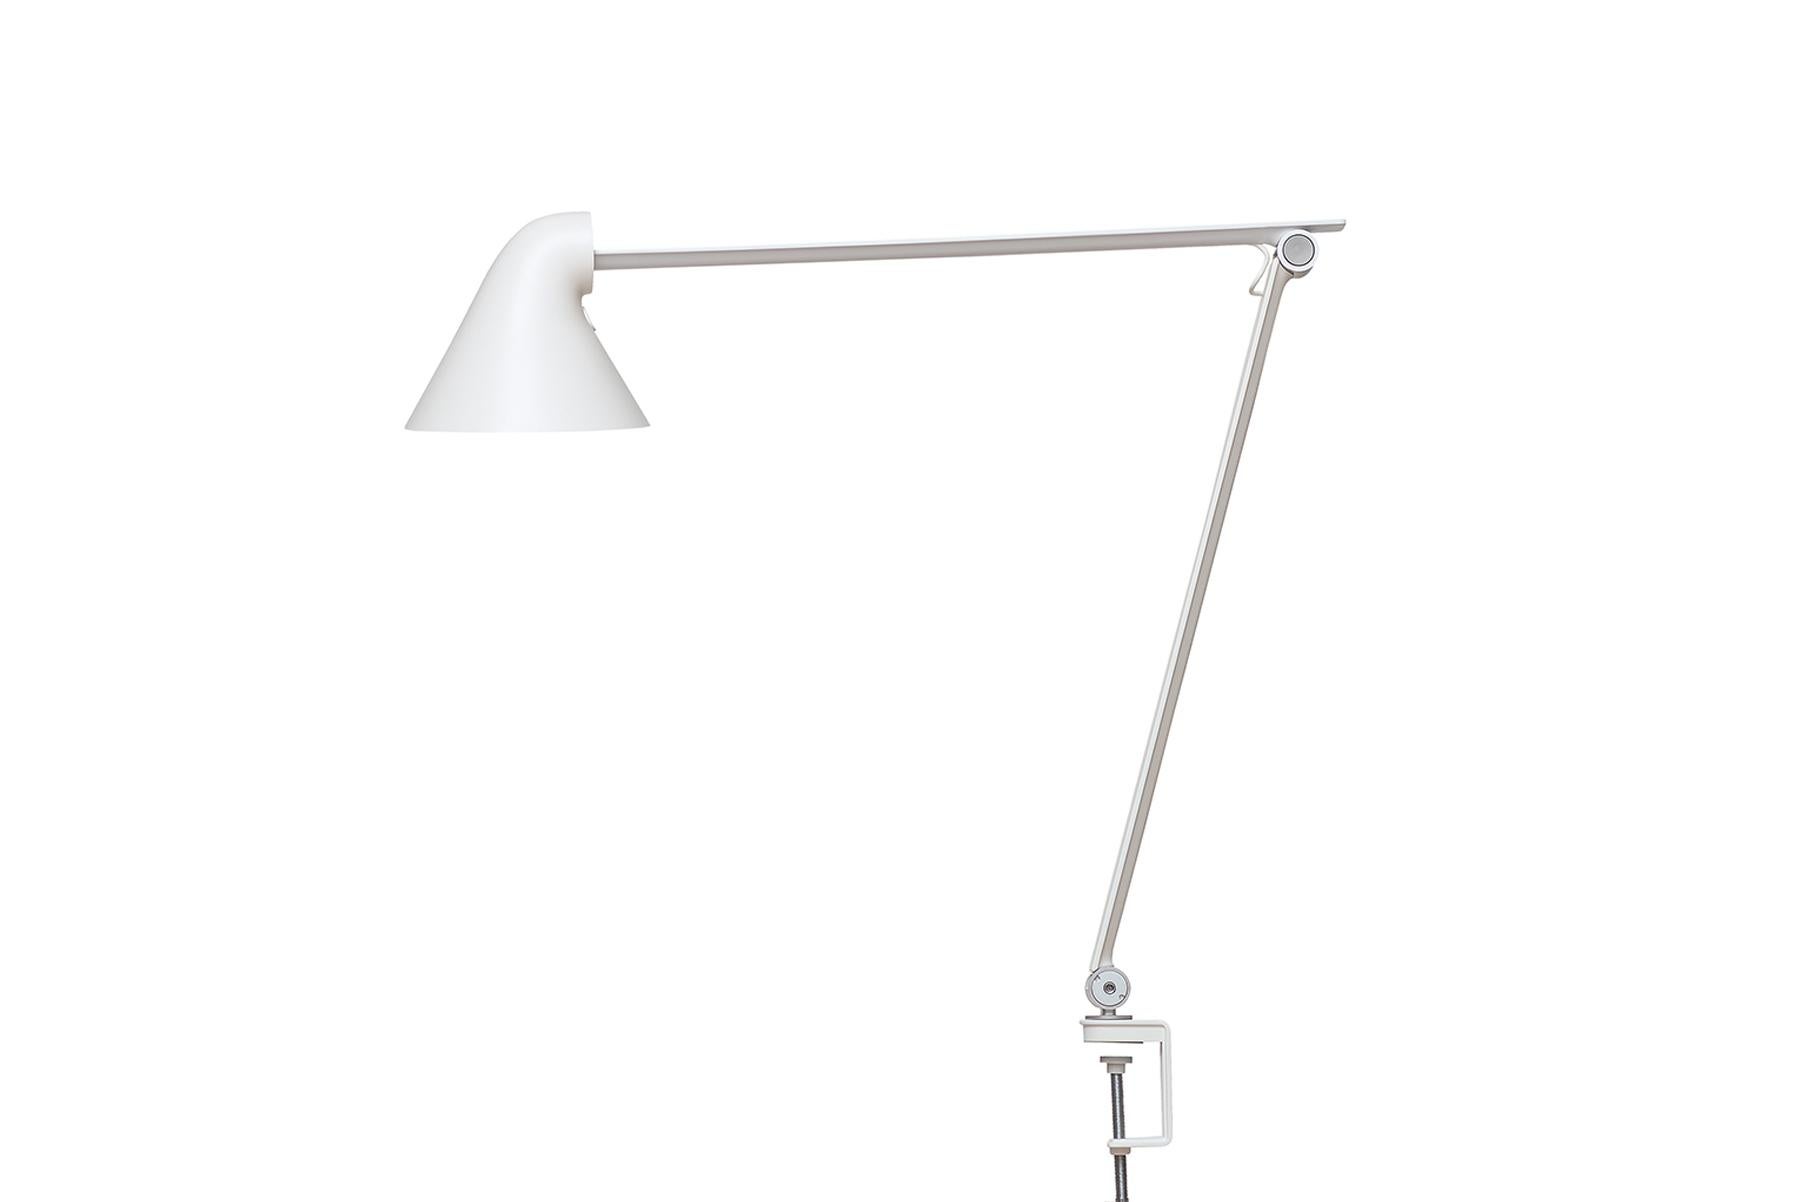 The fixture provides direct glare-free horizontal light while reflecting some of the light through the rear of the head, illuminating the top of the arm. The ergonomic design of the fixture head shapes the light and gives optimal light direction. A